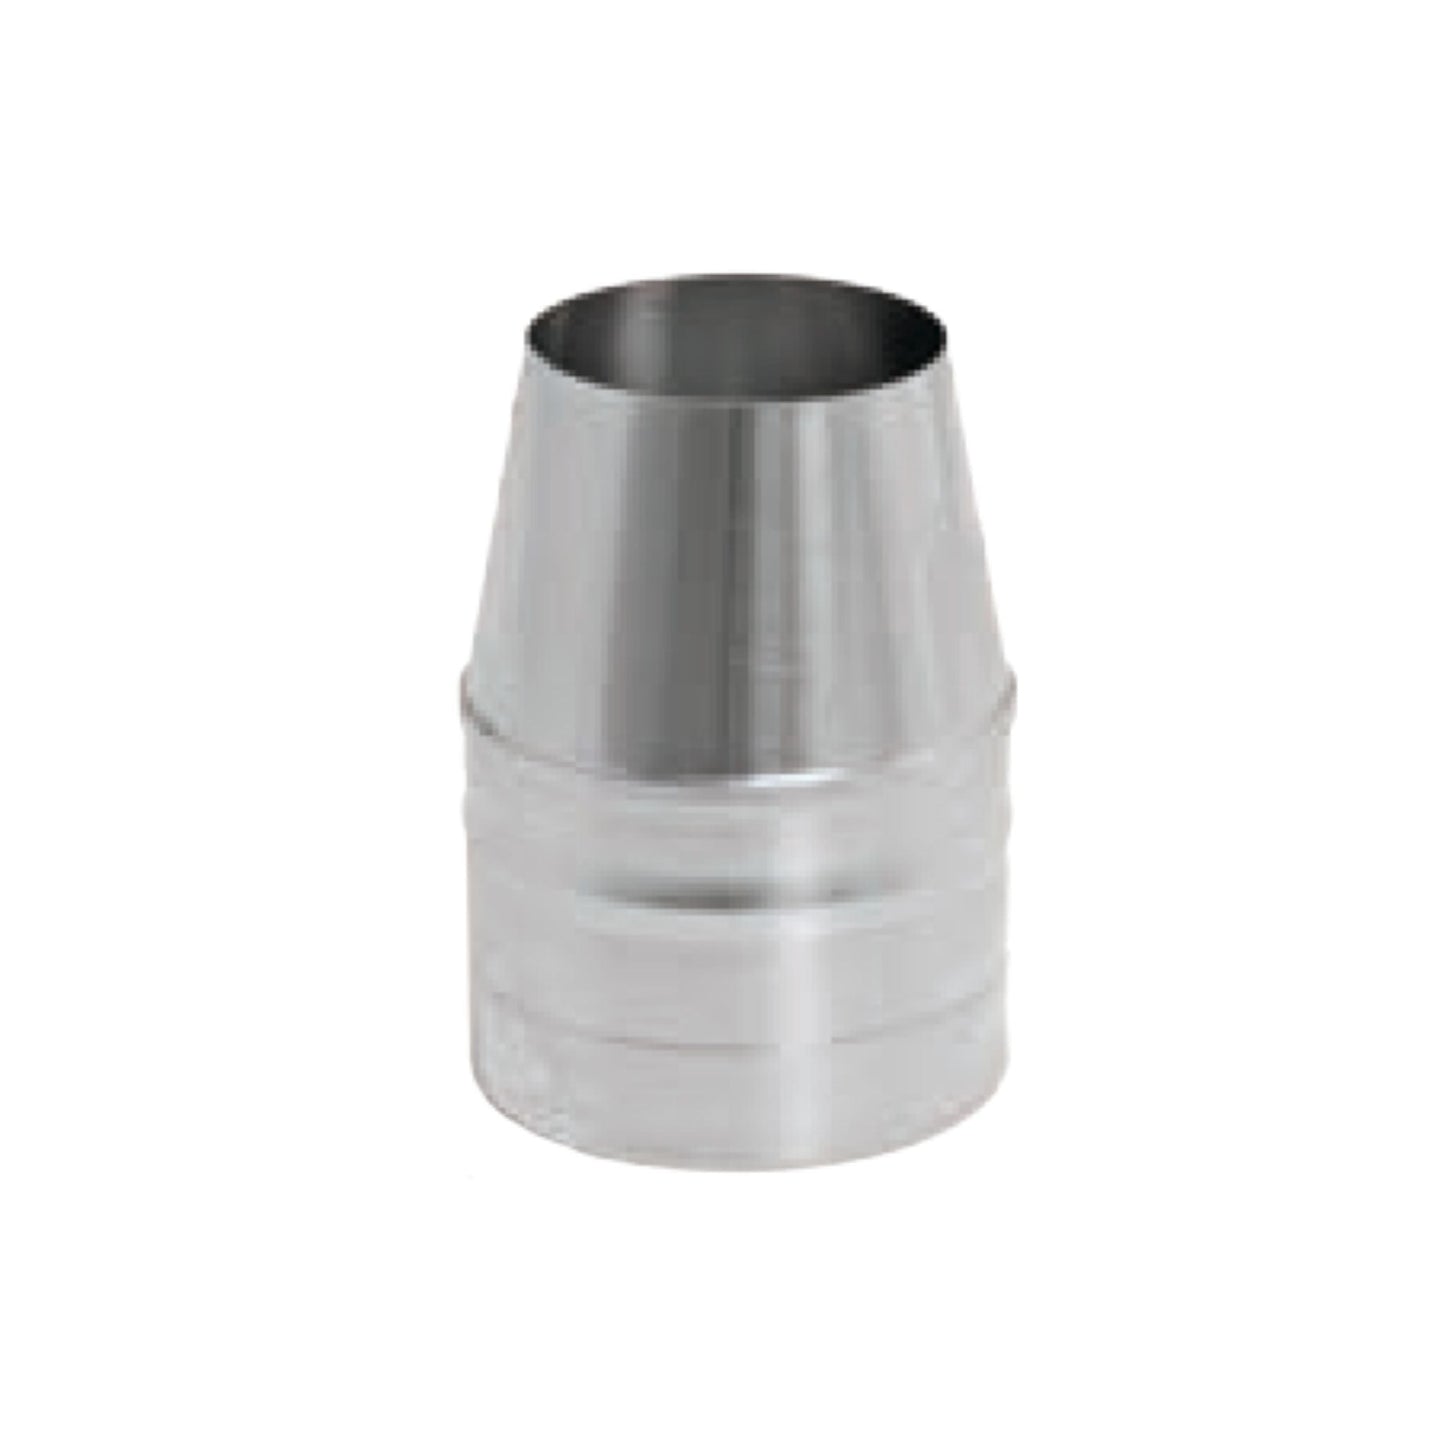 DuraVent FasNSeal 14" x 8" 29-4C Stainless Steel Termination Cone